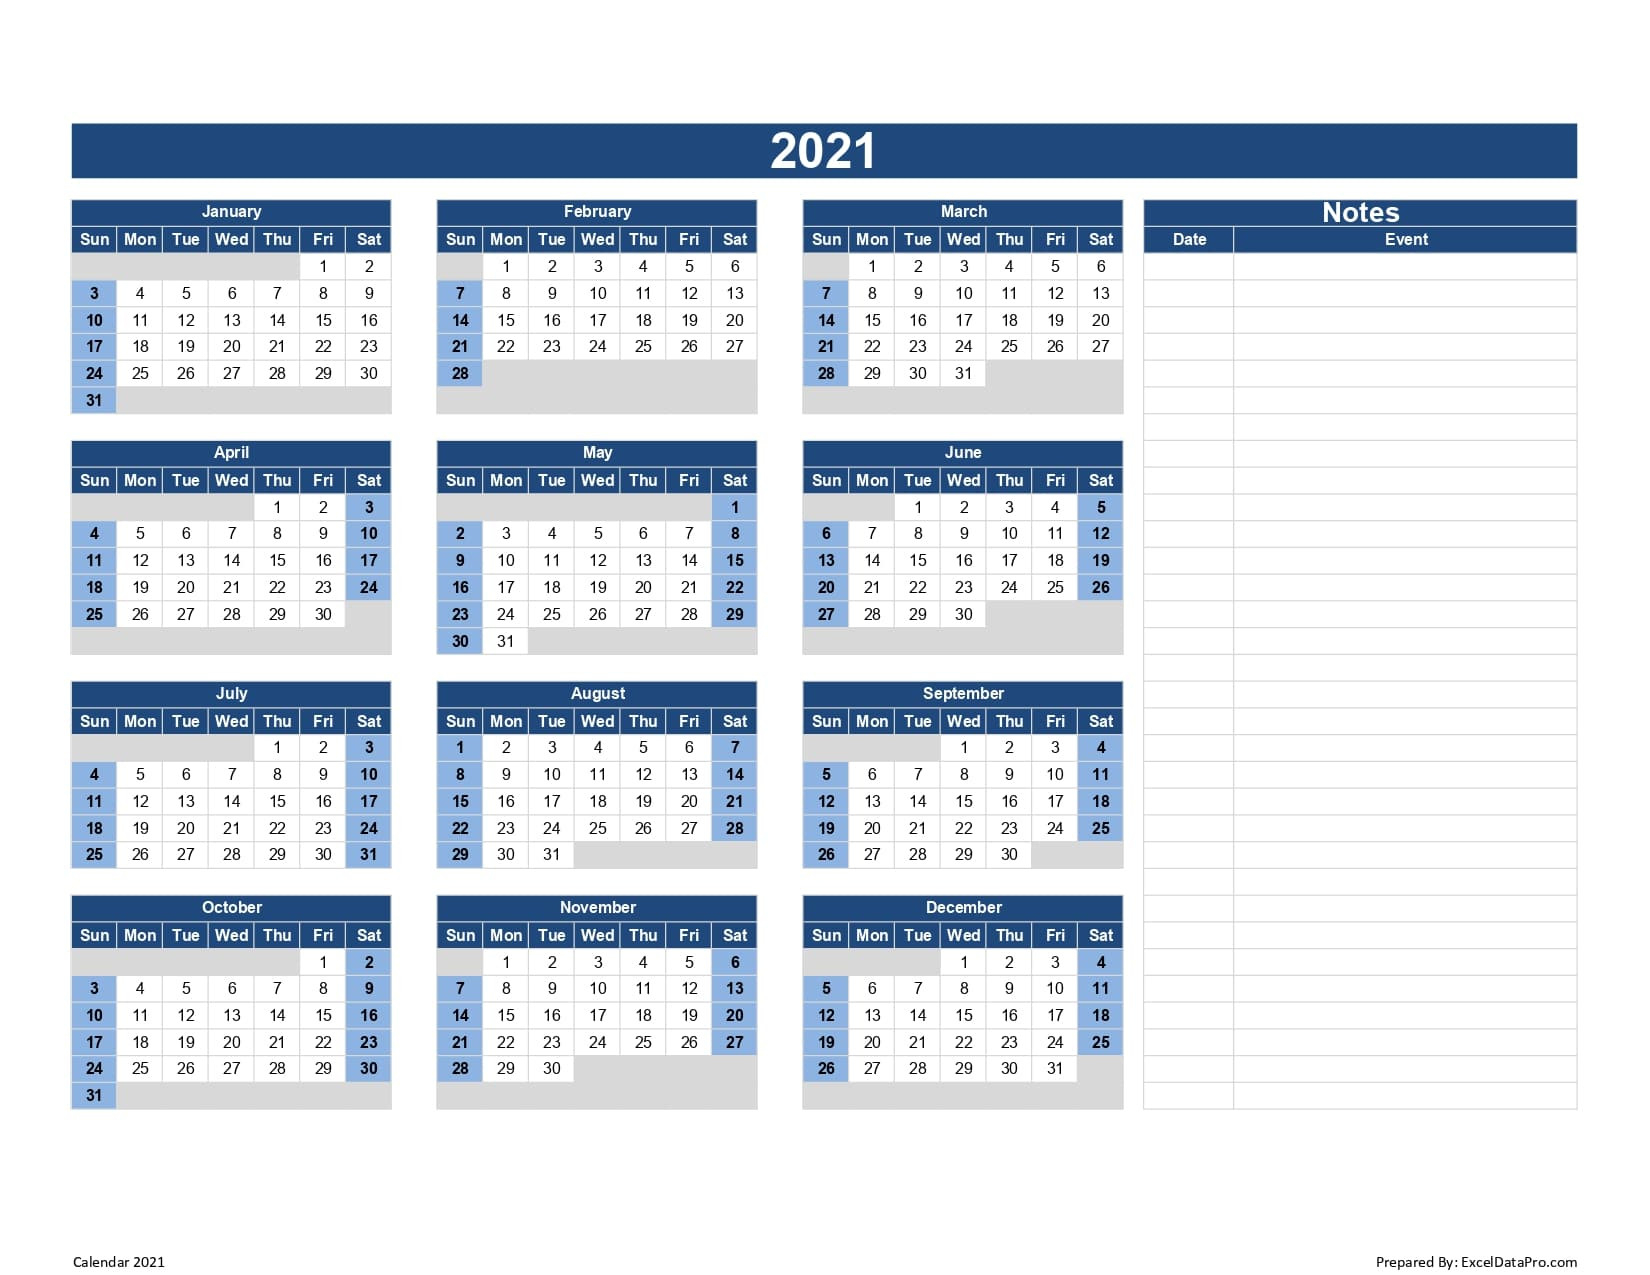 Download 2021 Yearly Calendar (Sun Start) Excel Template-Blank Fill In Calendar For 2021